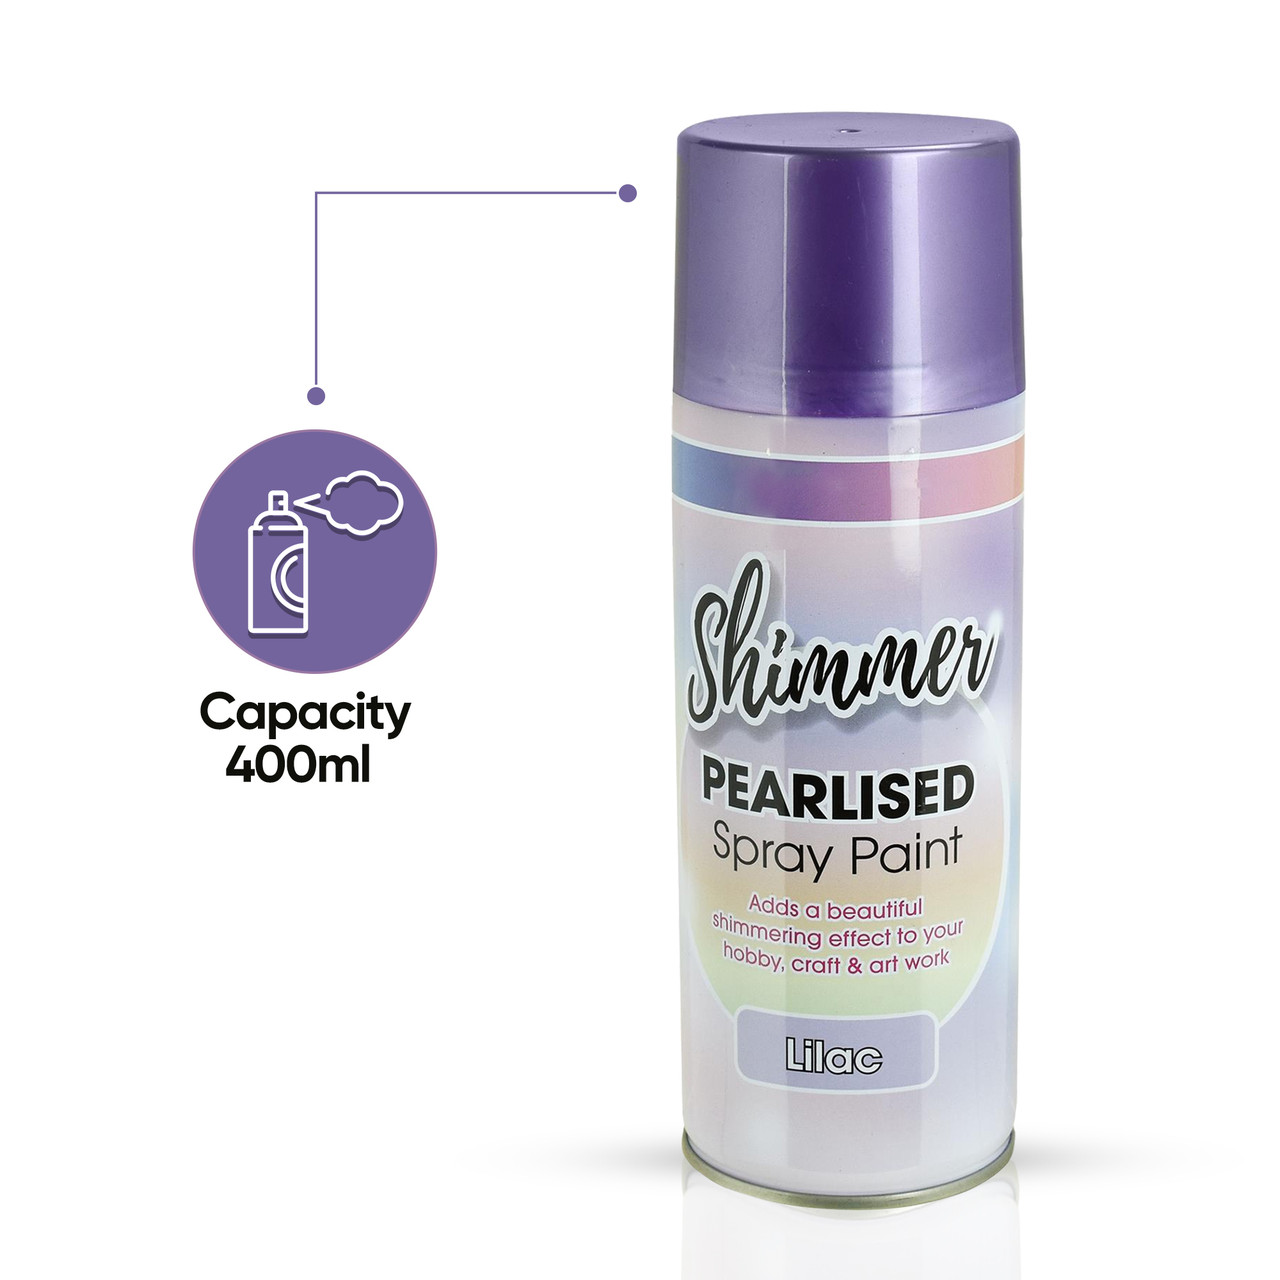 PEARL EFFECT PEARLISED SPRAY PAINT SHIMMERING PINK LILAC 400ML PEARLESCENT  WHITE